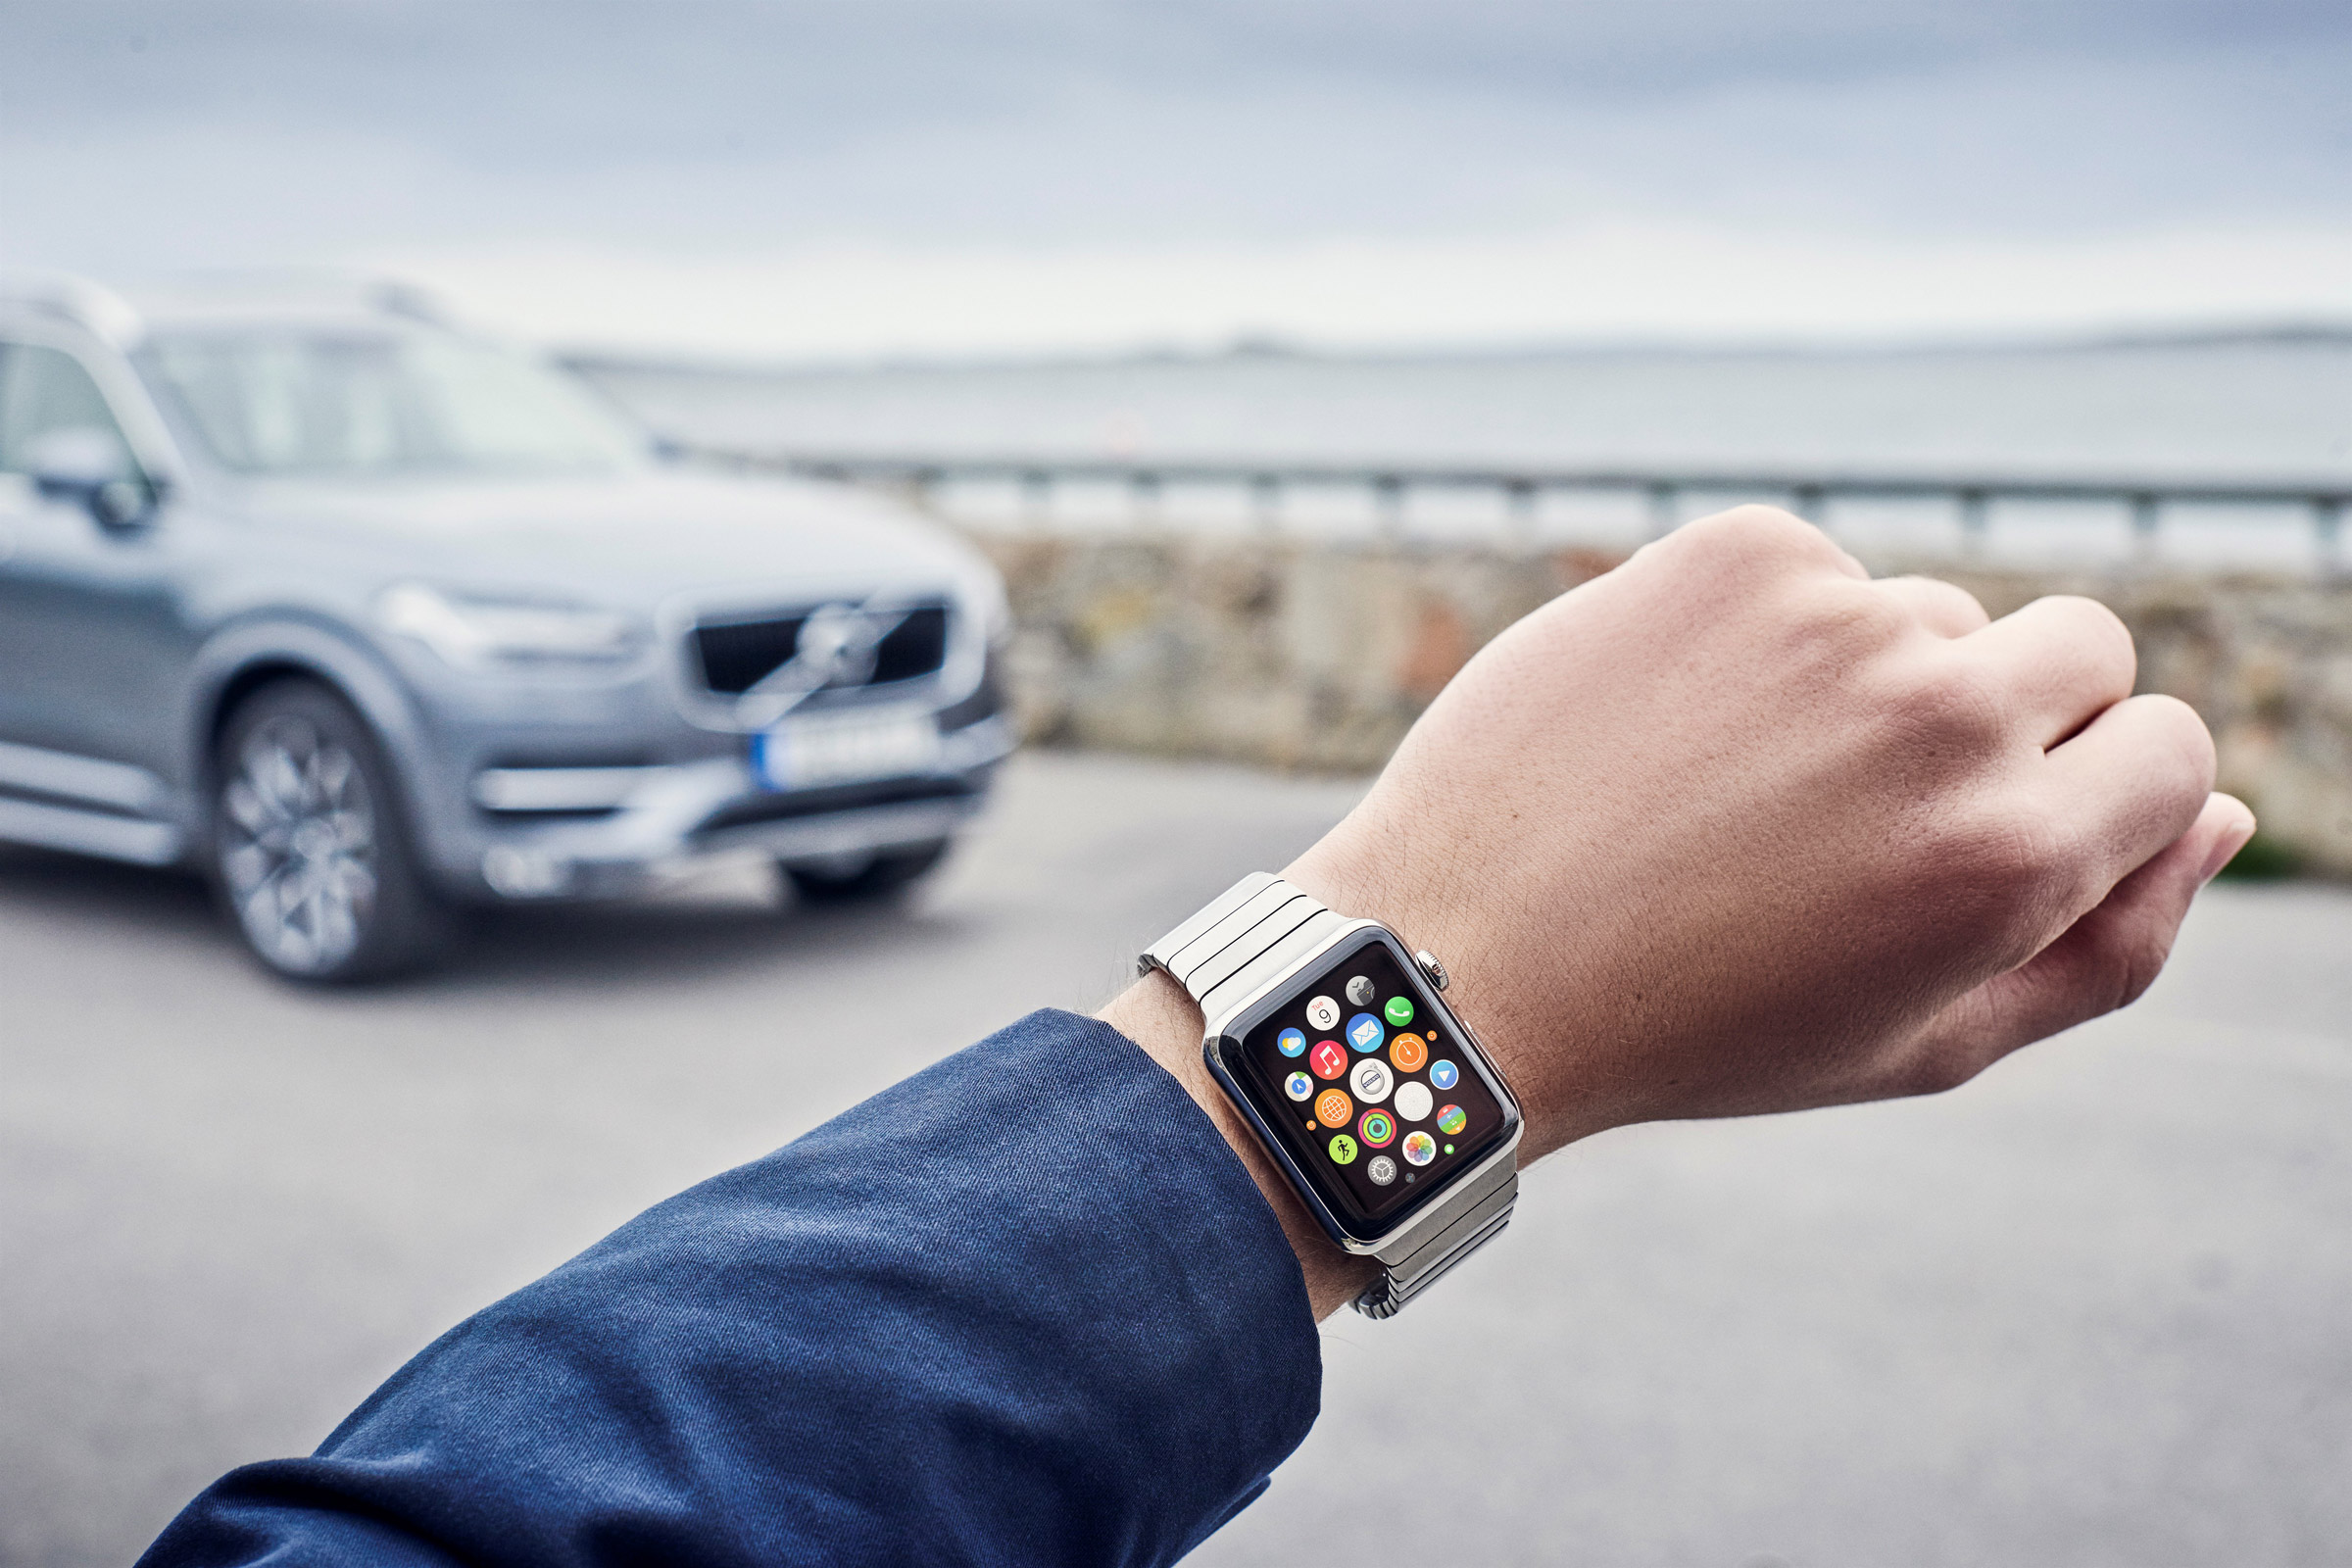 aria-label="163099 volvo on call app in the apple watch 0"